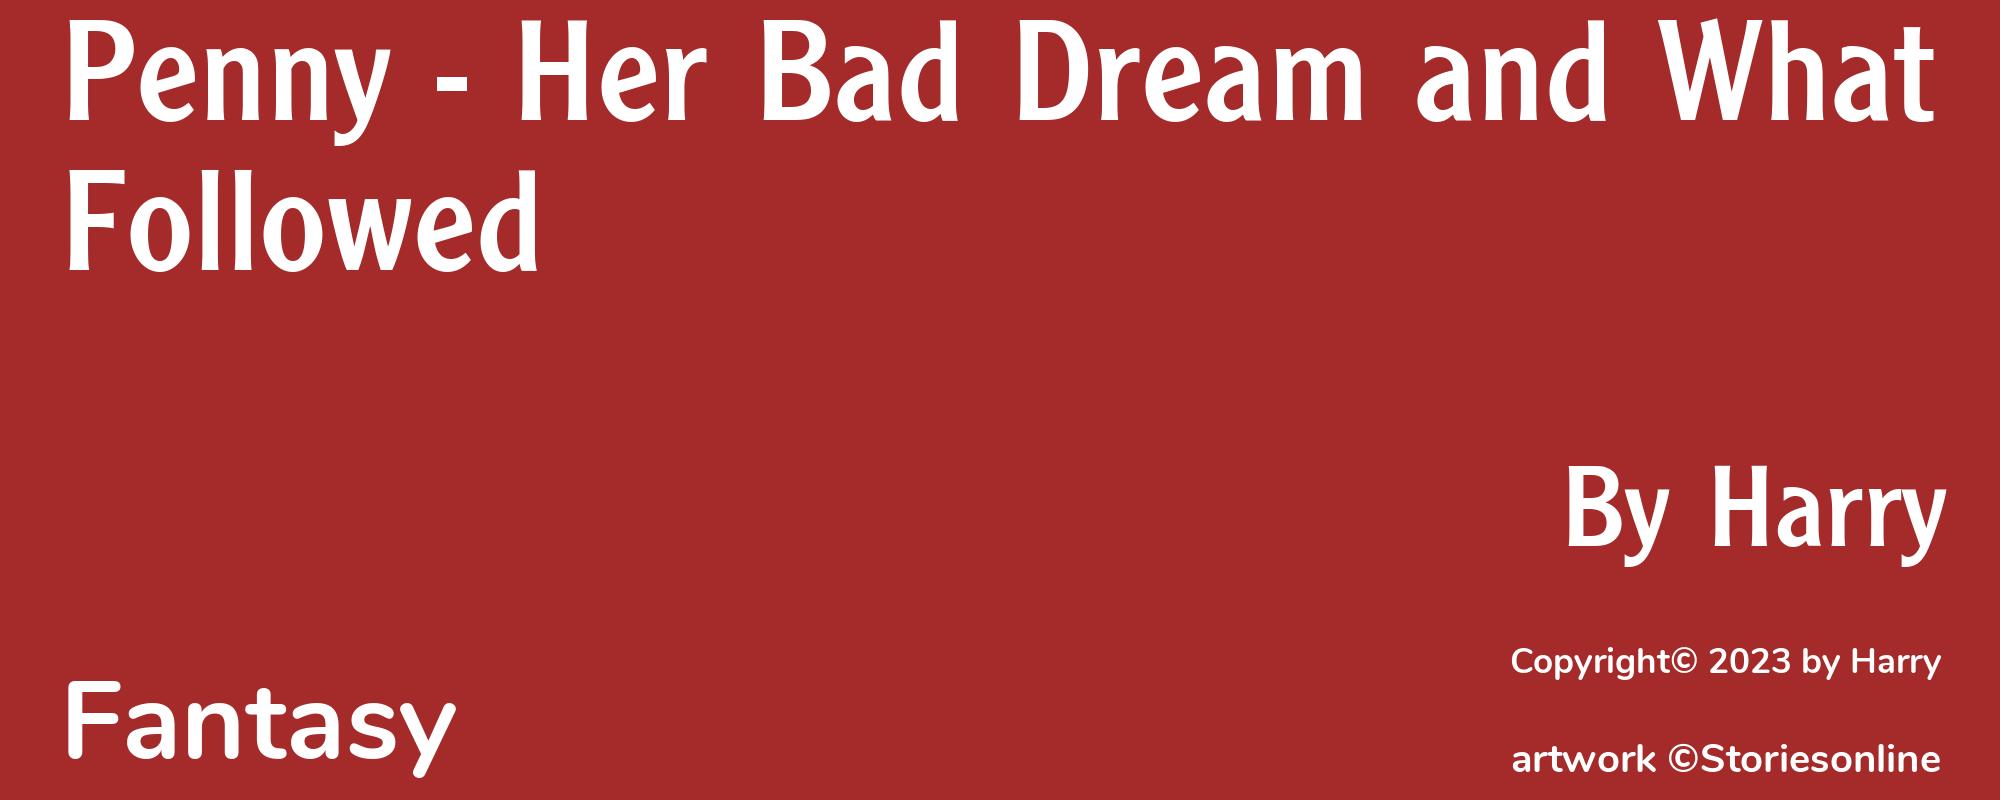 Penny - Her Bad Dream and What Followed - Cover